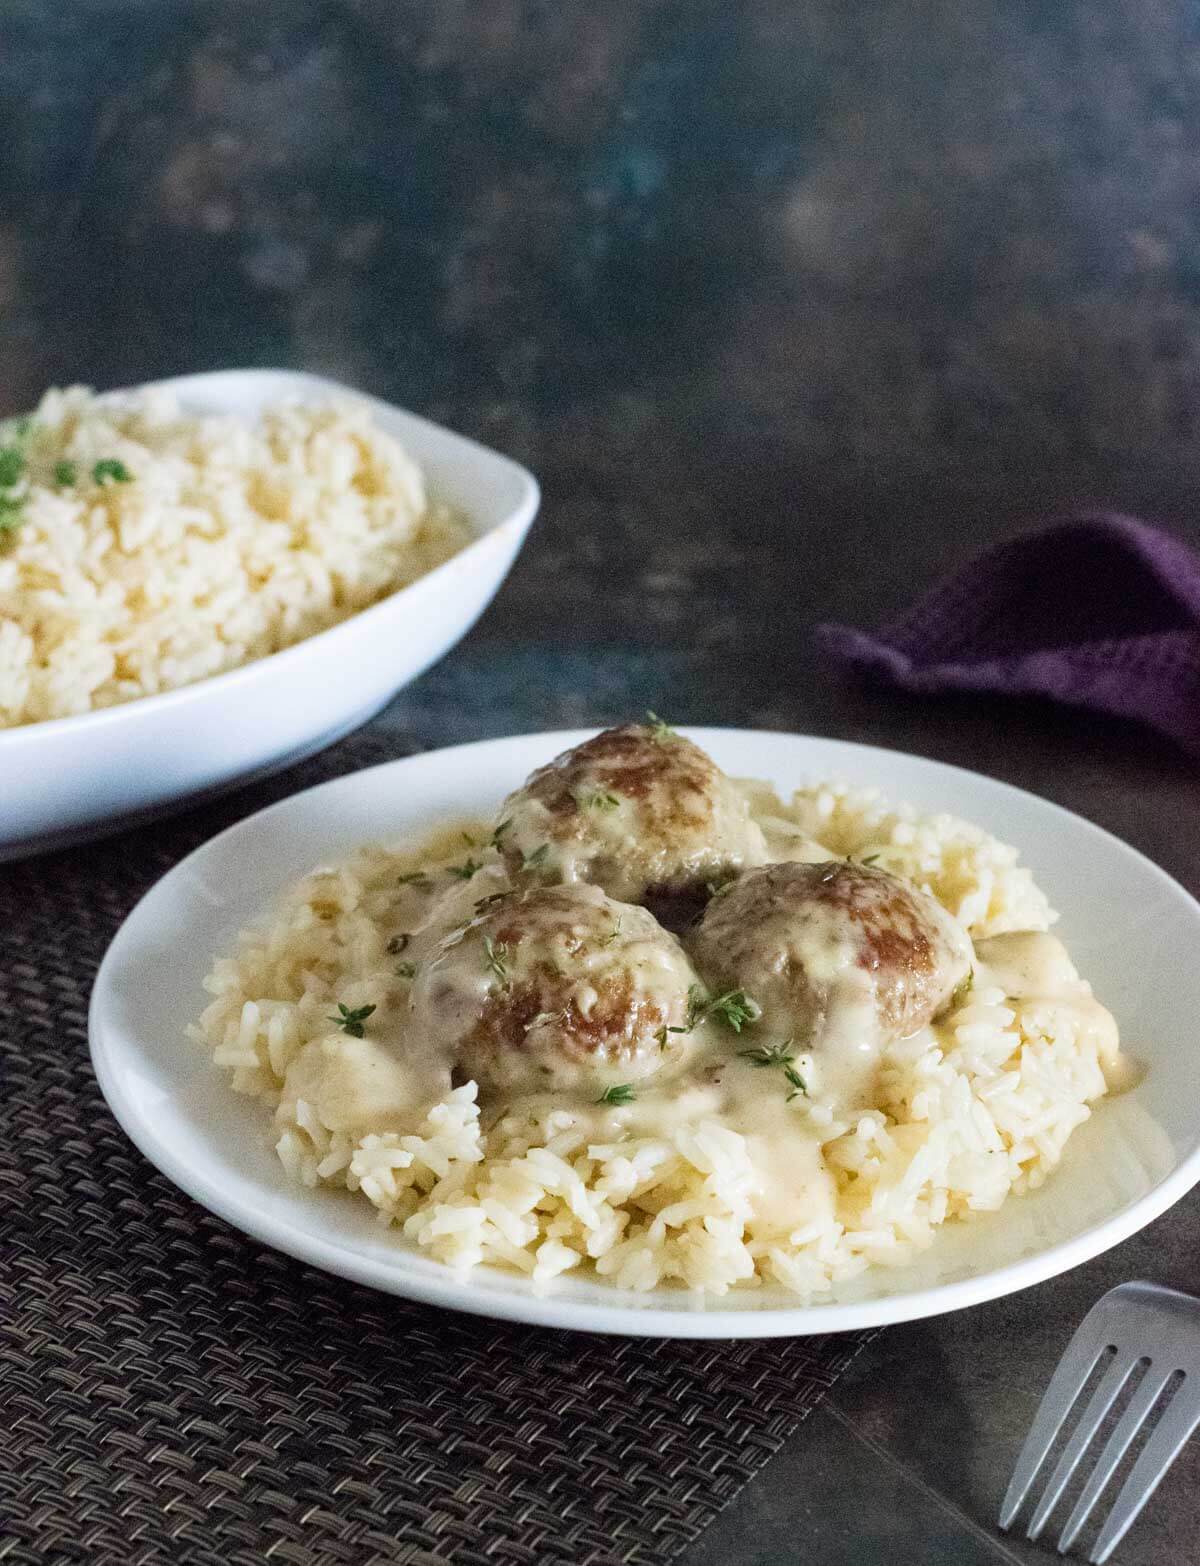 Serving meatballs and gravy over rice.